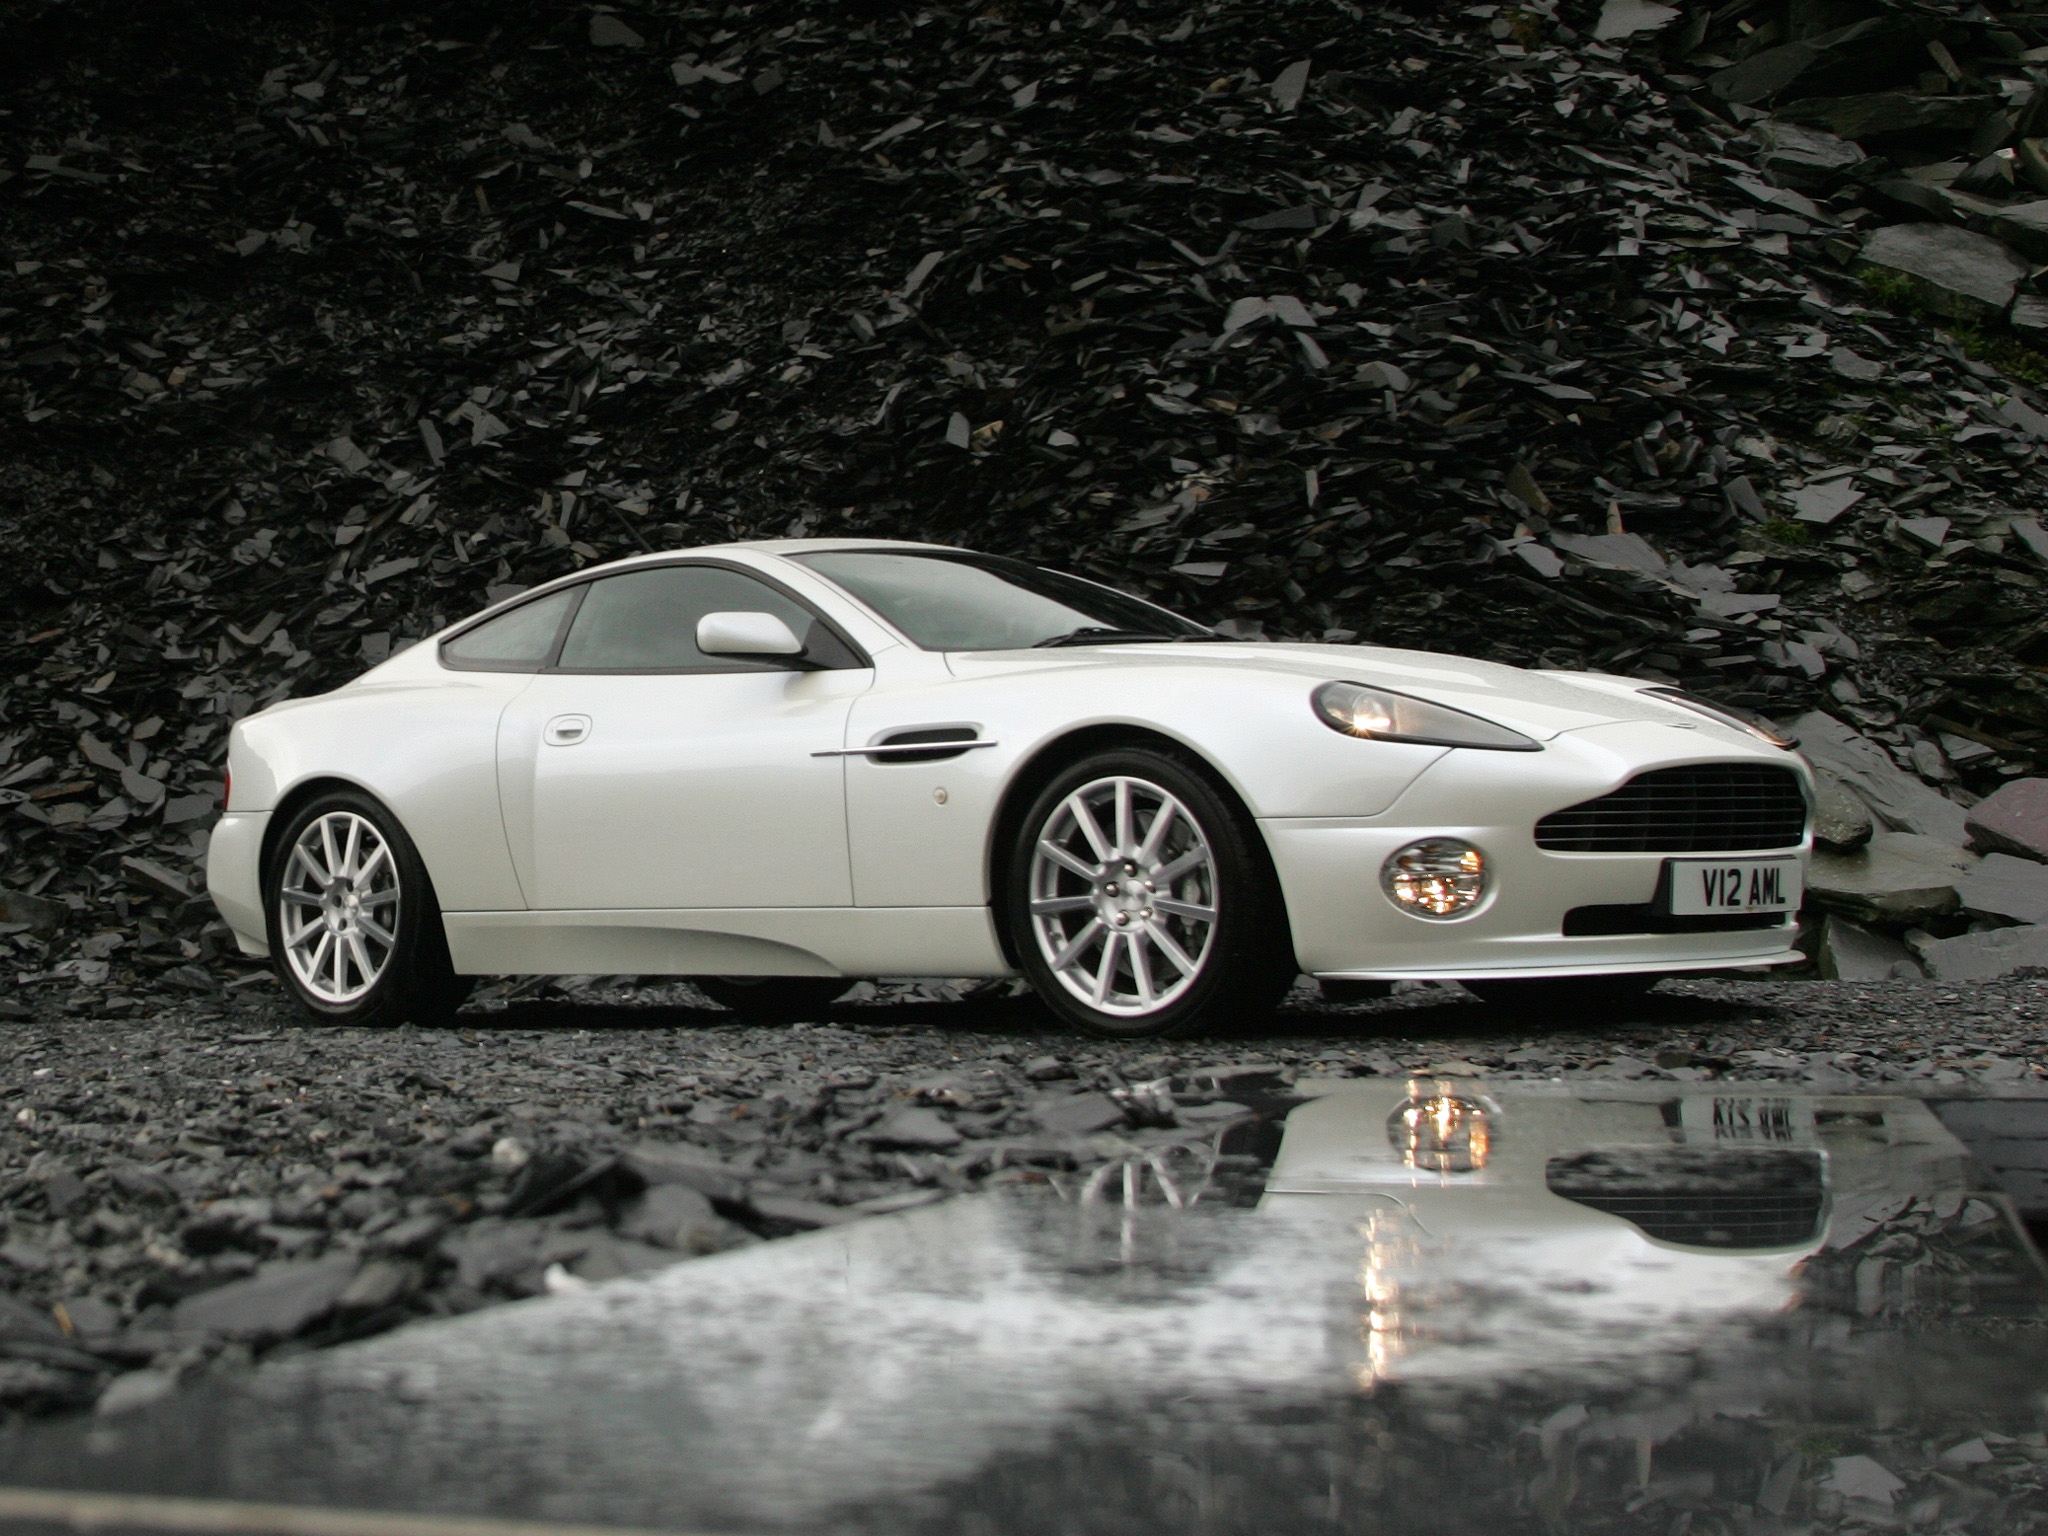 aston martin, cars, white, reflection, side view, 2004, v12, vanquish download HD wallpaper